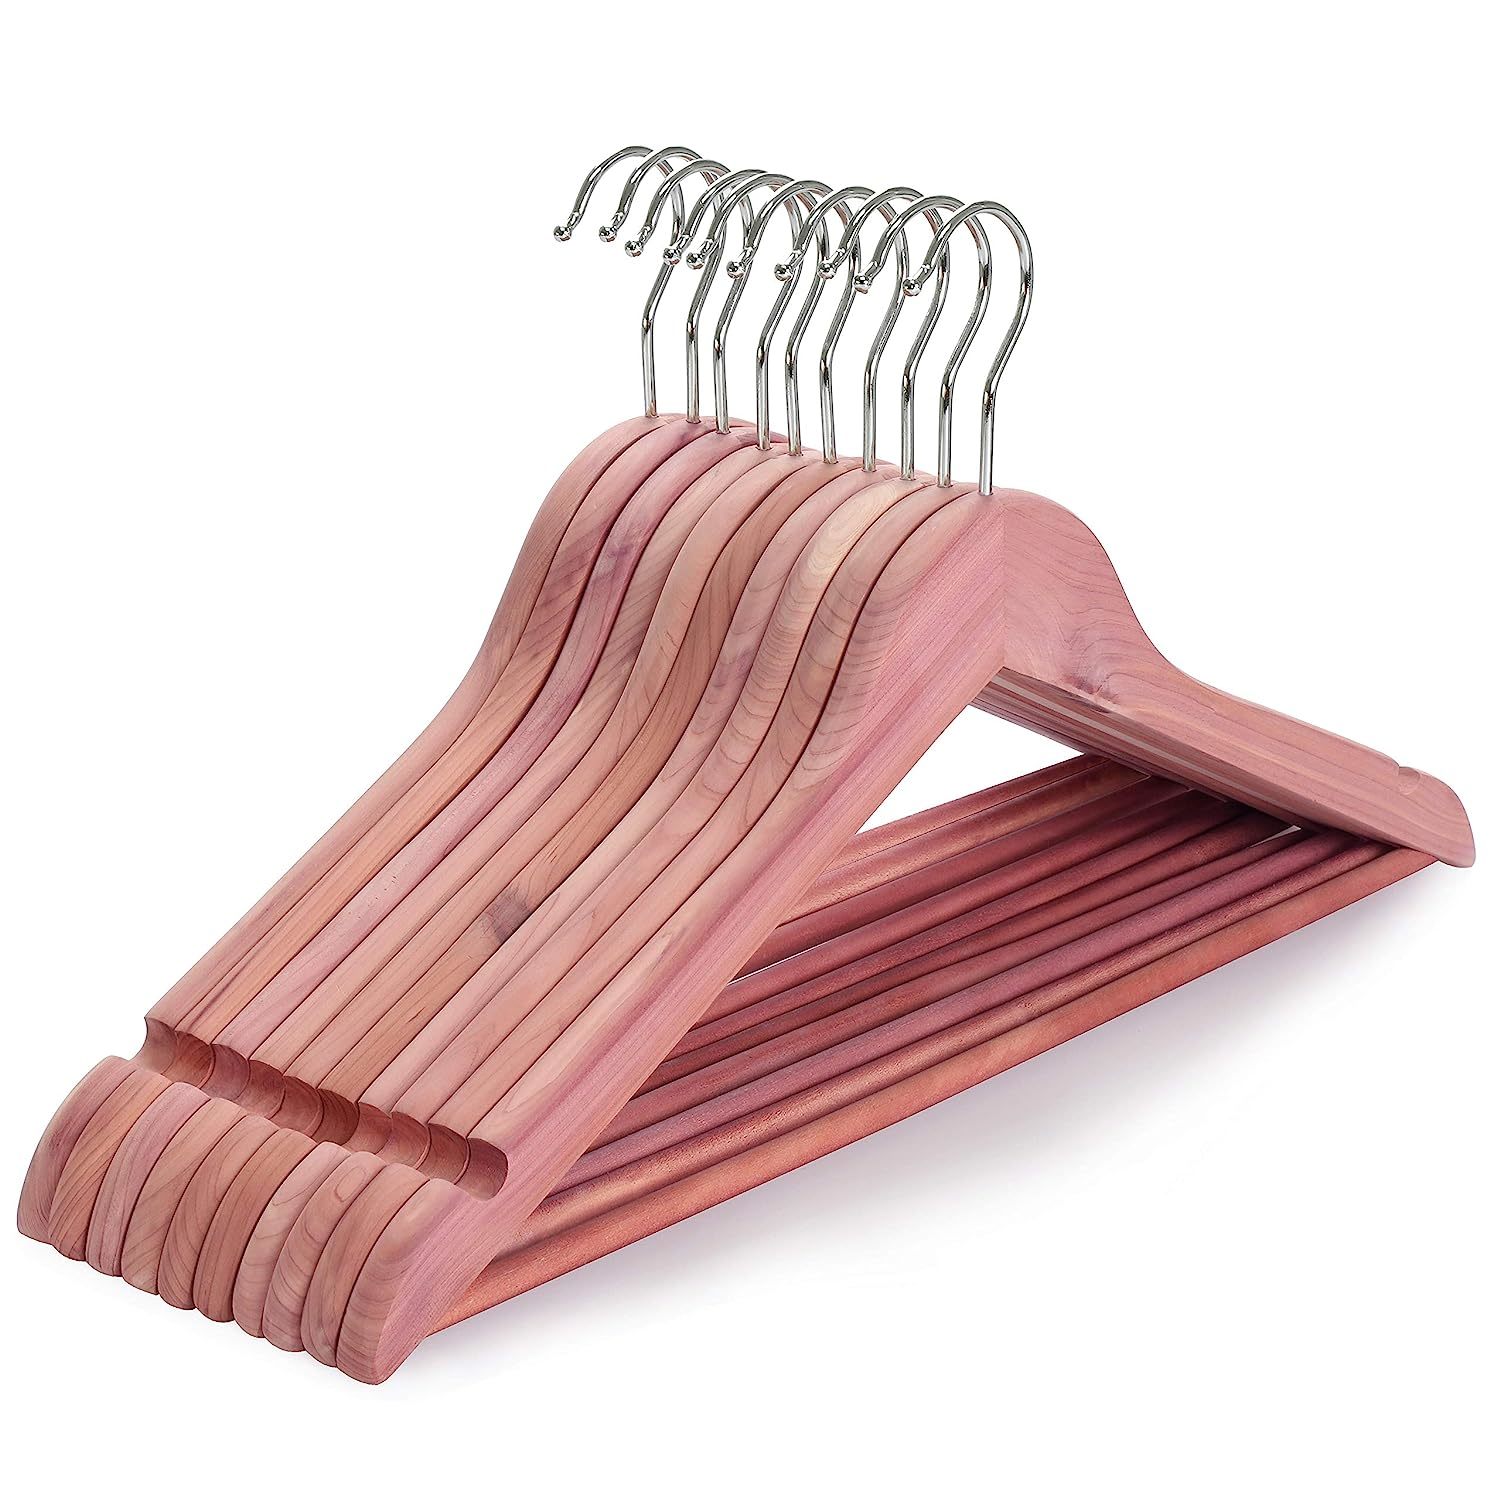 Primary image for American Red Cedar Wood Coat Hangers, Wooden Suit Hangers, 10 Pack-Natural, Smoo